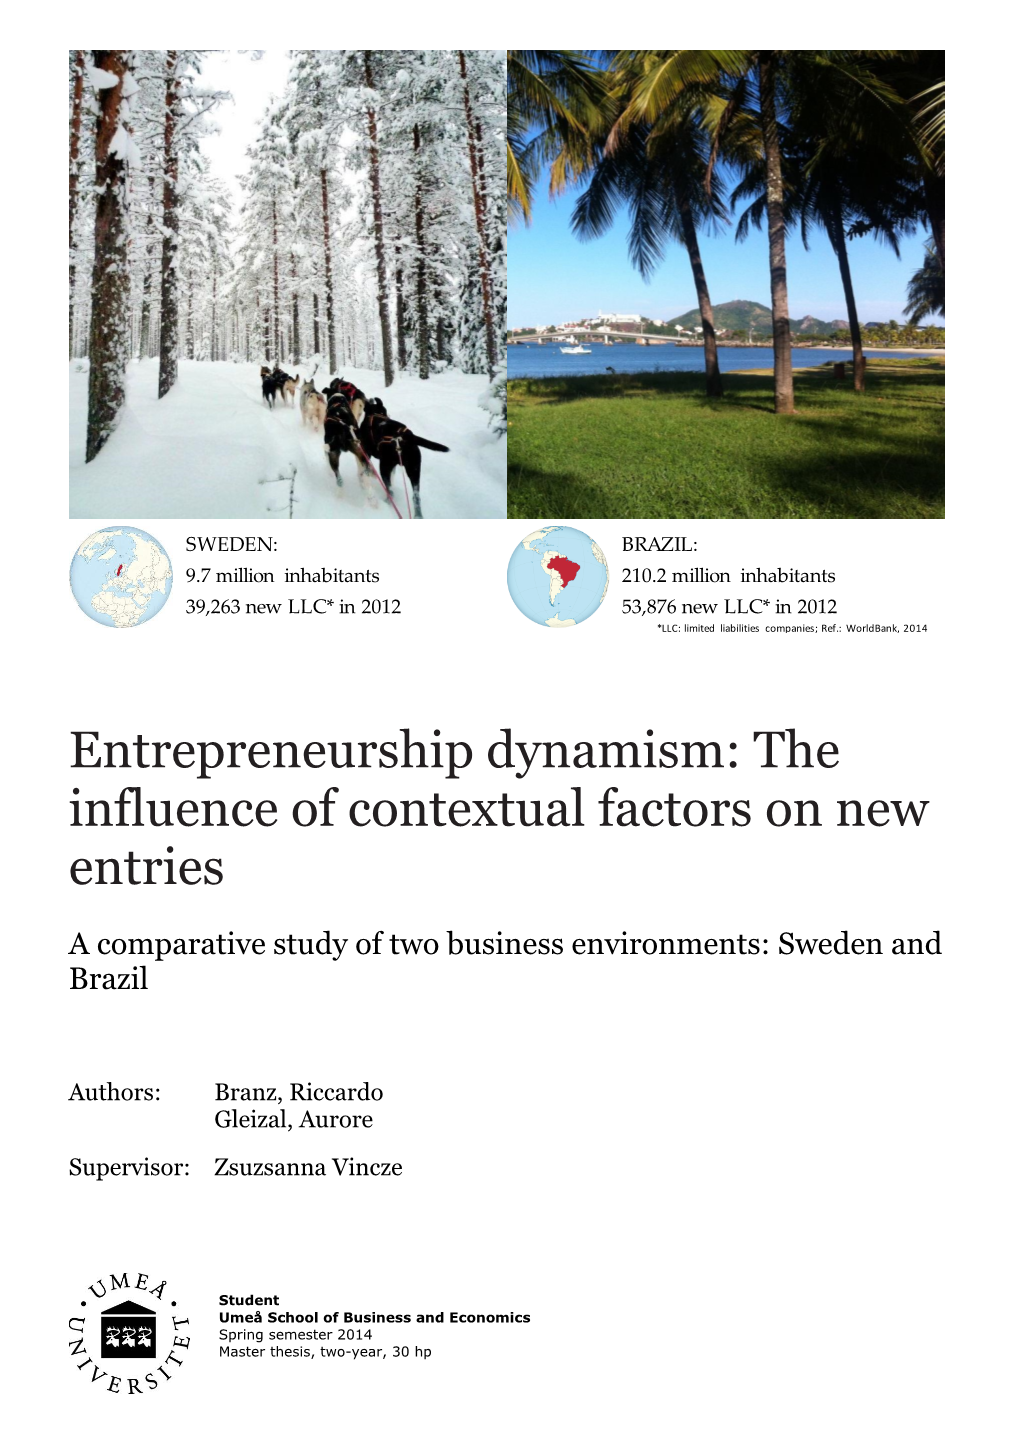 Entrepreneurship Dynamism: the Influence of Contextual Factors on New Entries